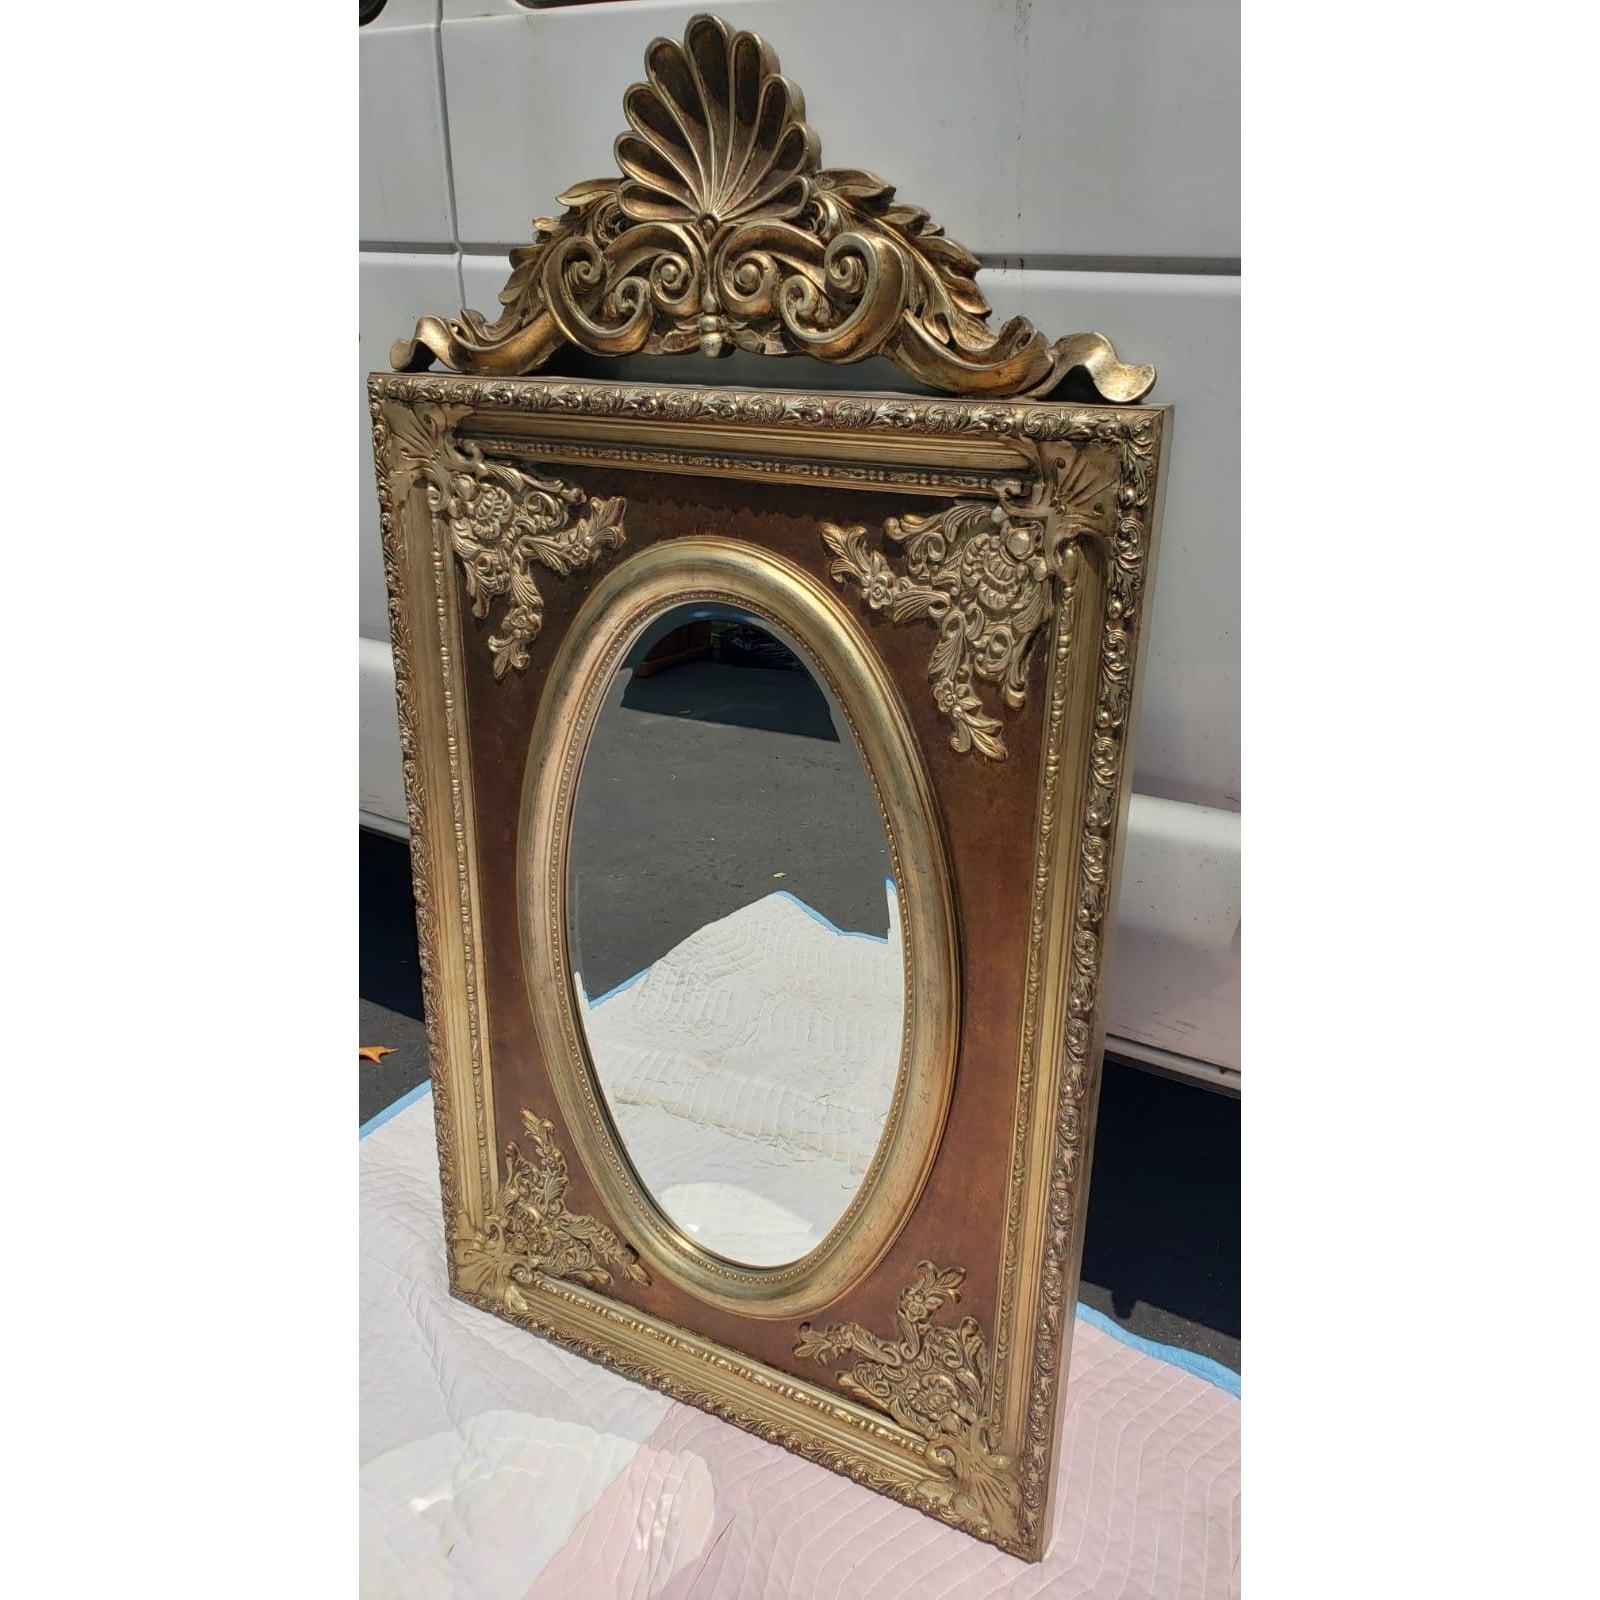 Ornate Beveled wall mirror. 
exceptionally beautiful and very decorative mirror.
Attributed to the Bradburn Gallery.
Mirror measures 28